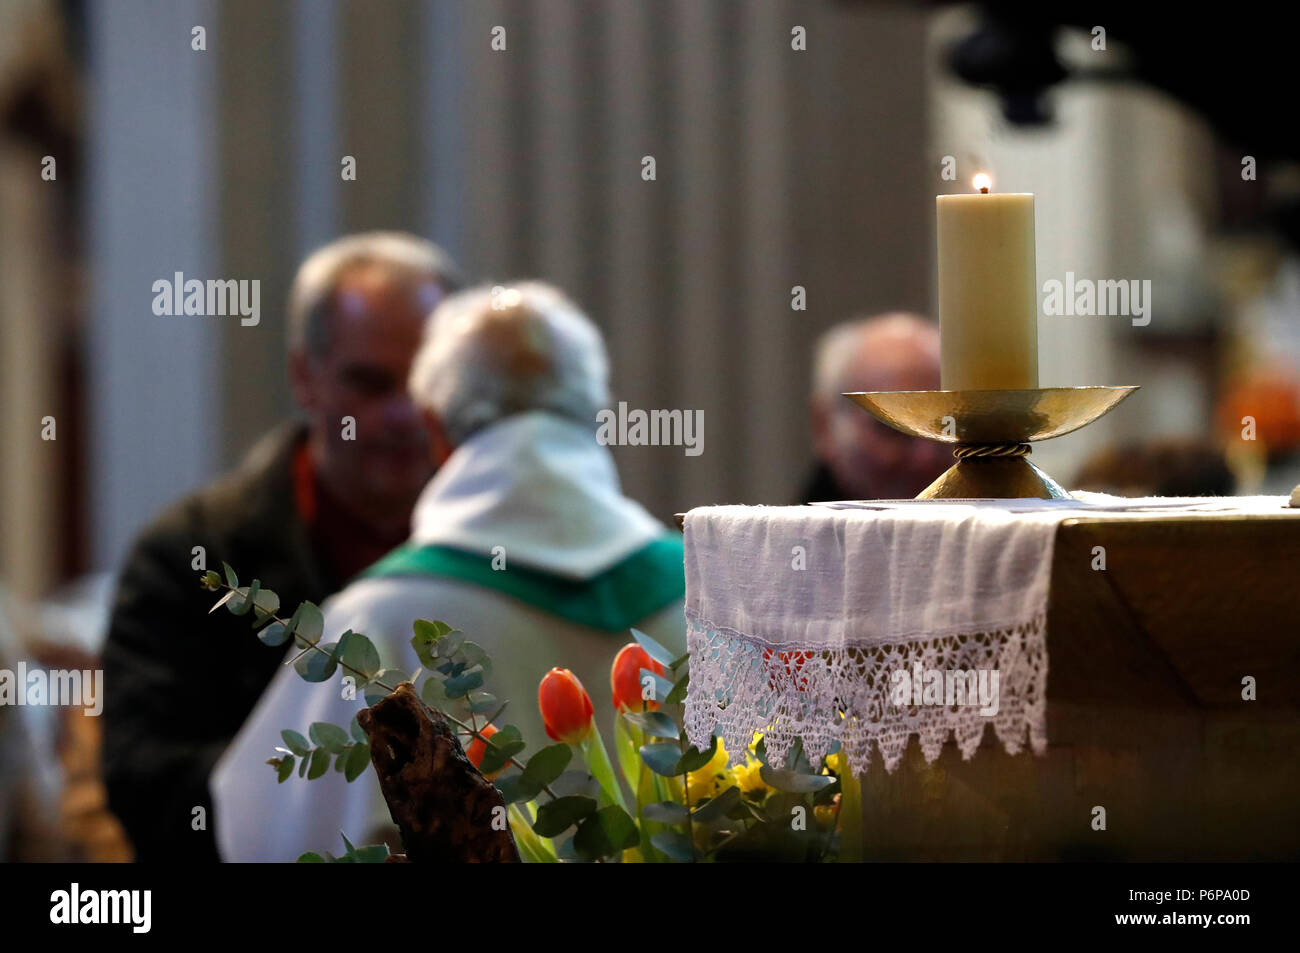 Saint-Jacques church.  Catholic mass.  Priest giving Holy Communion. Sallanches. France. Stock Photo